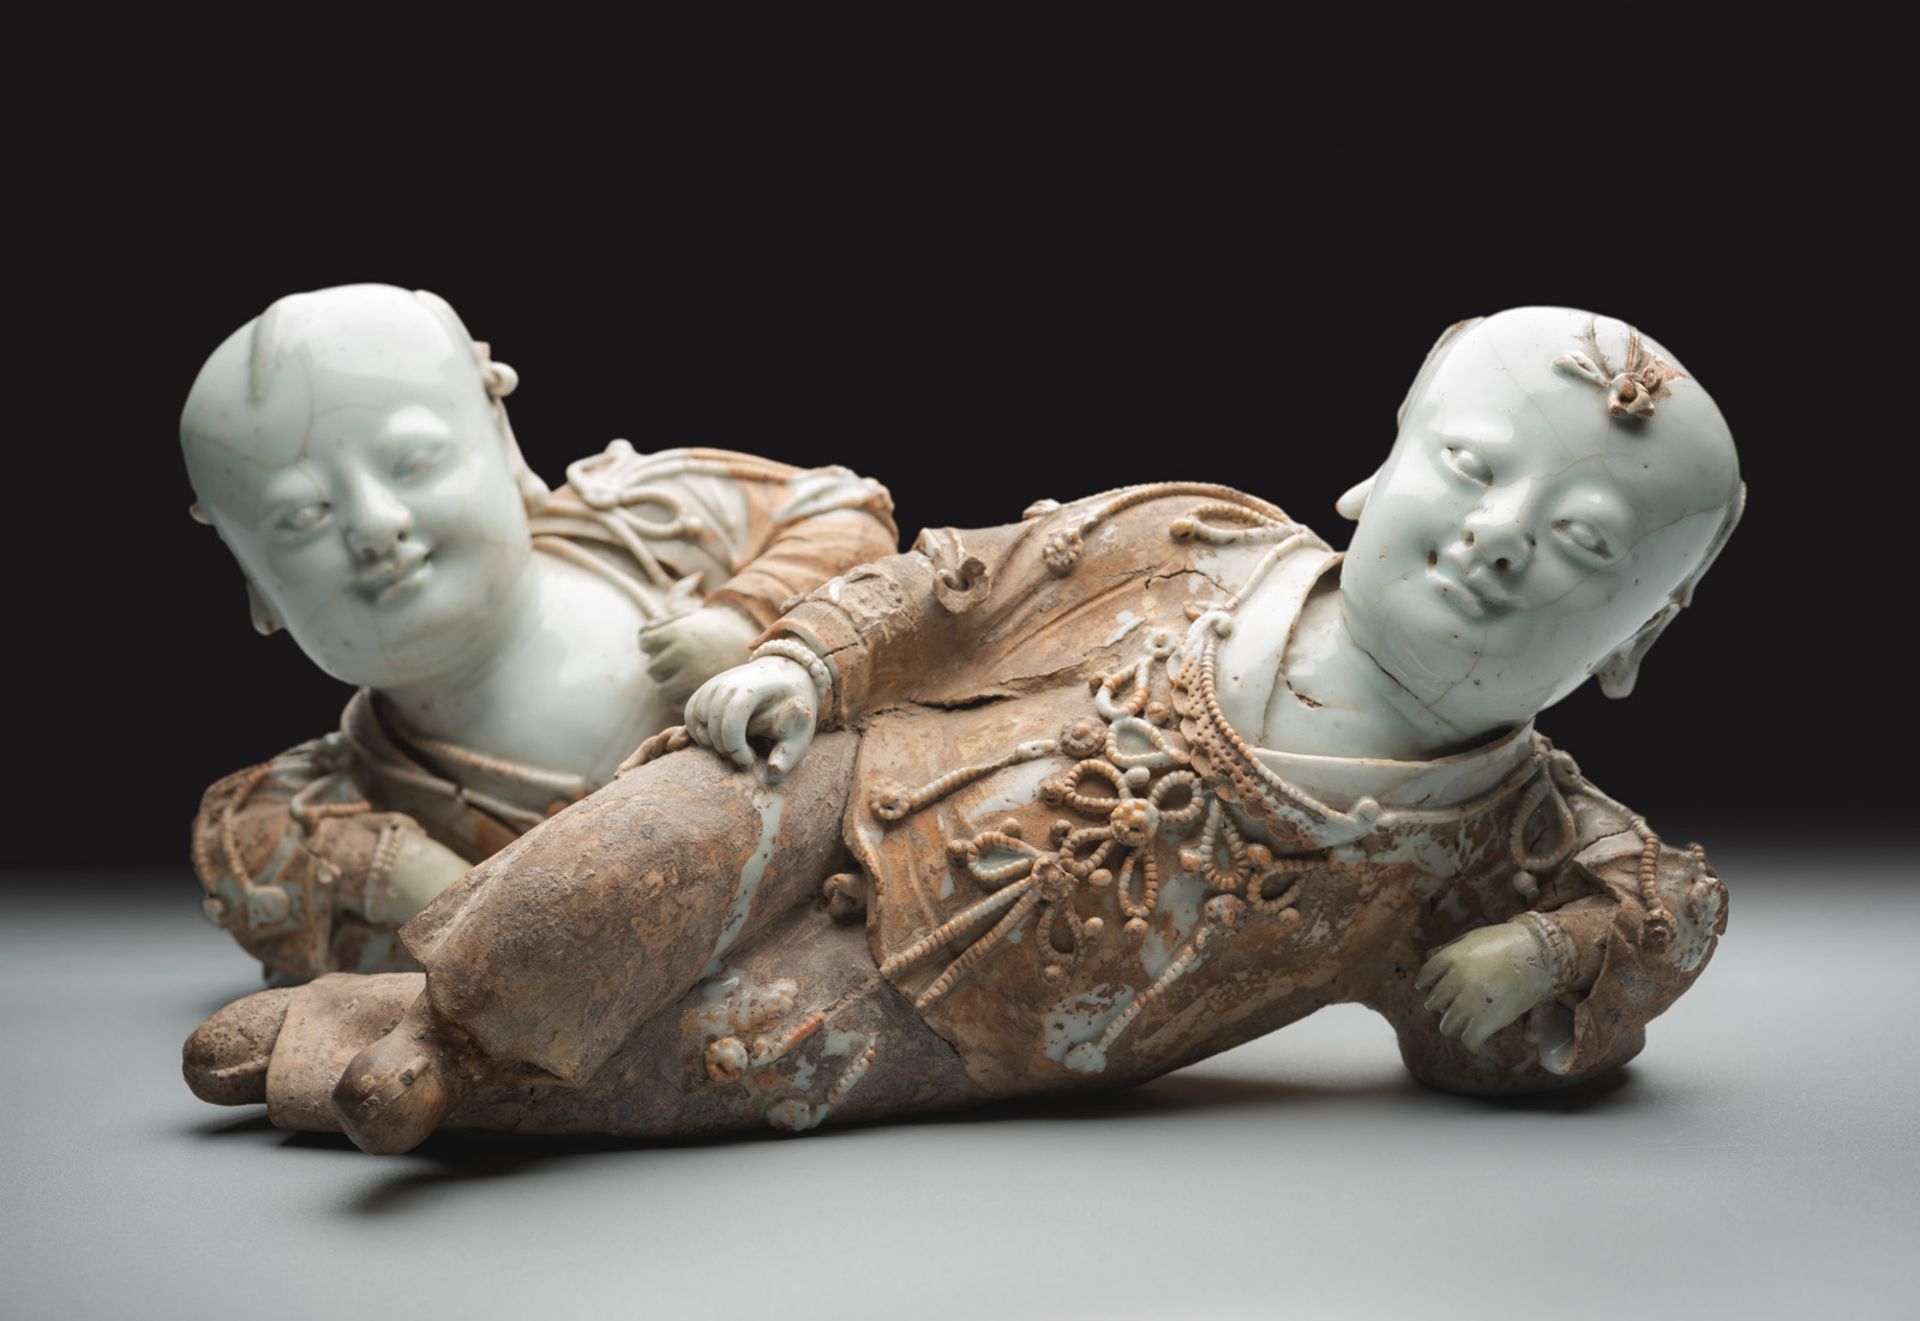 A VERY RARE PAIR OF PART-GLAZED QINGBAI MODELS OF RECLINING BOYS - Image 4 of 6